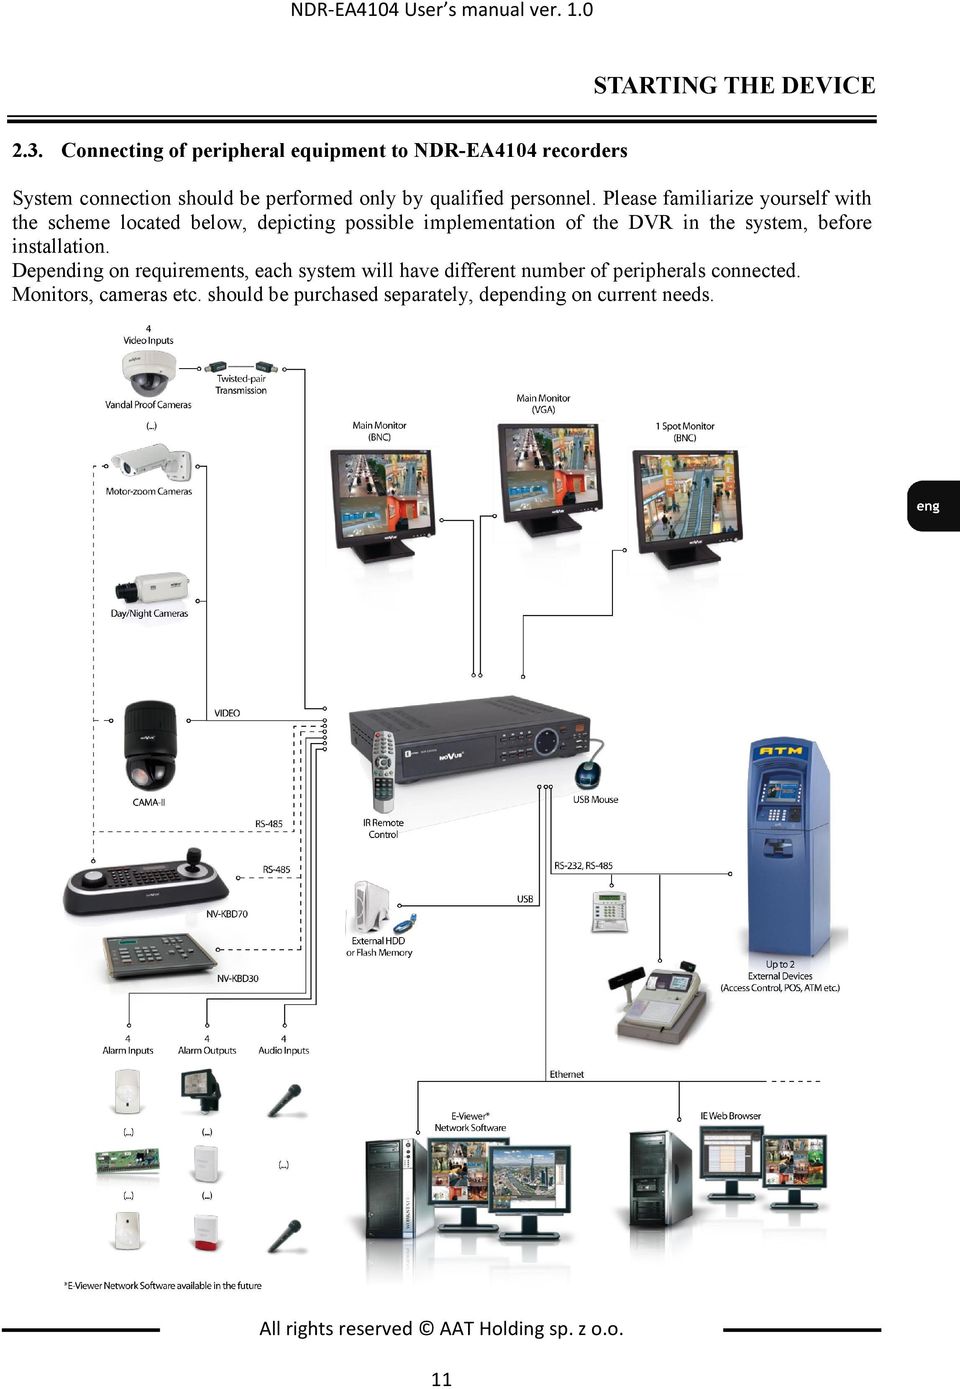 Please familiarize yourself with the scheme located below, depicting possible implementation of the DVR in the system, before